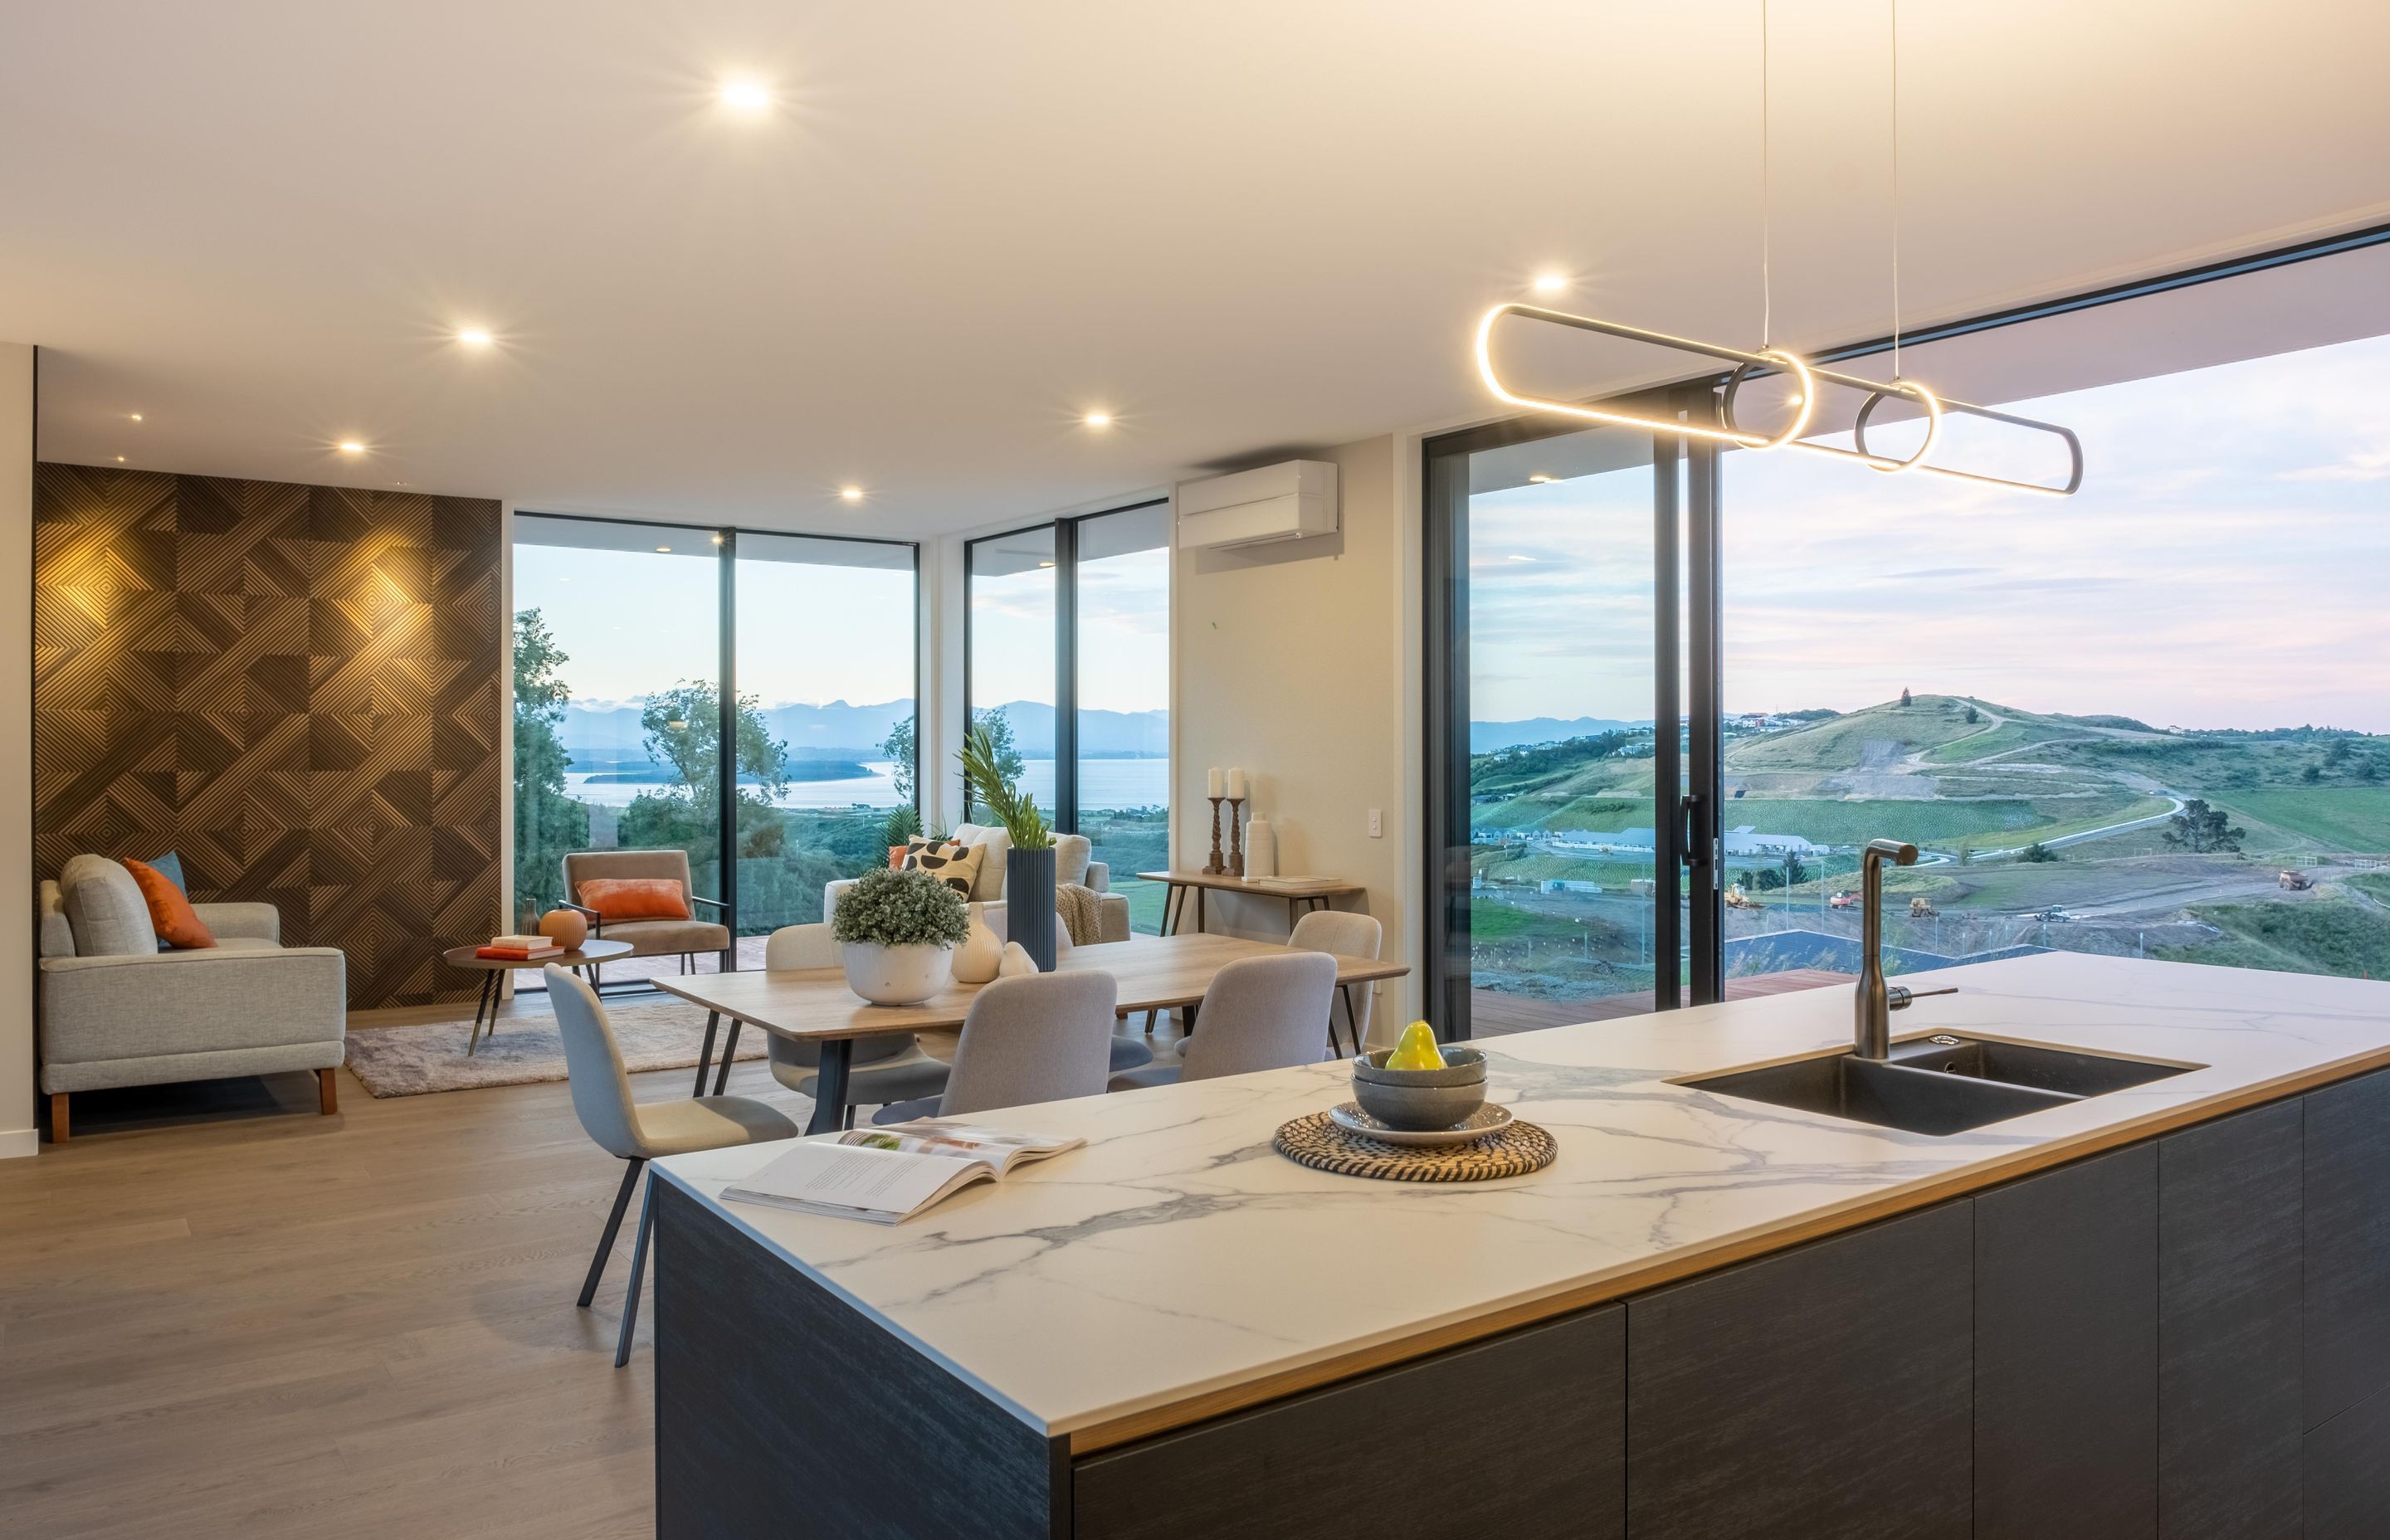 Inside, extensive glazing allows indoor-outdoor flow, and for the vista to be enjoyed.